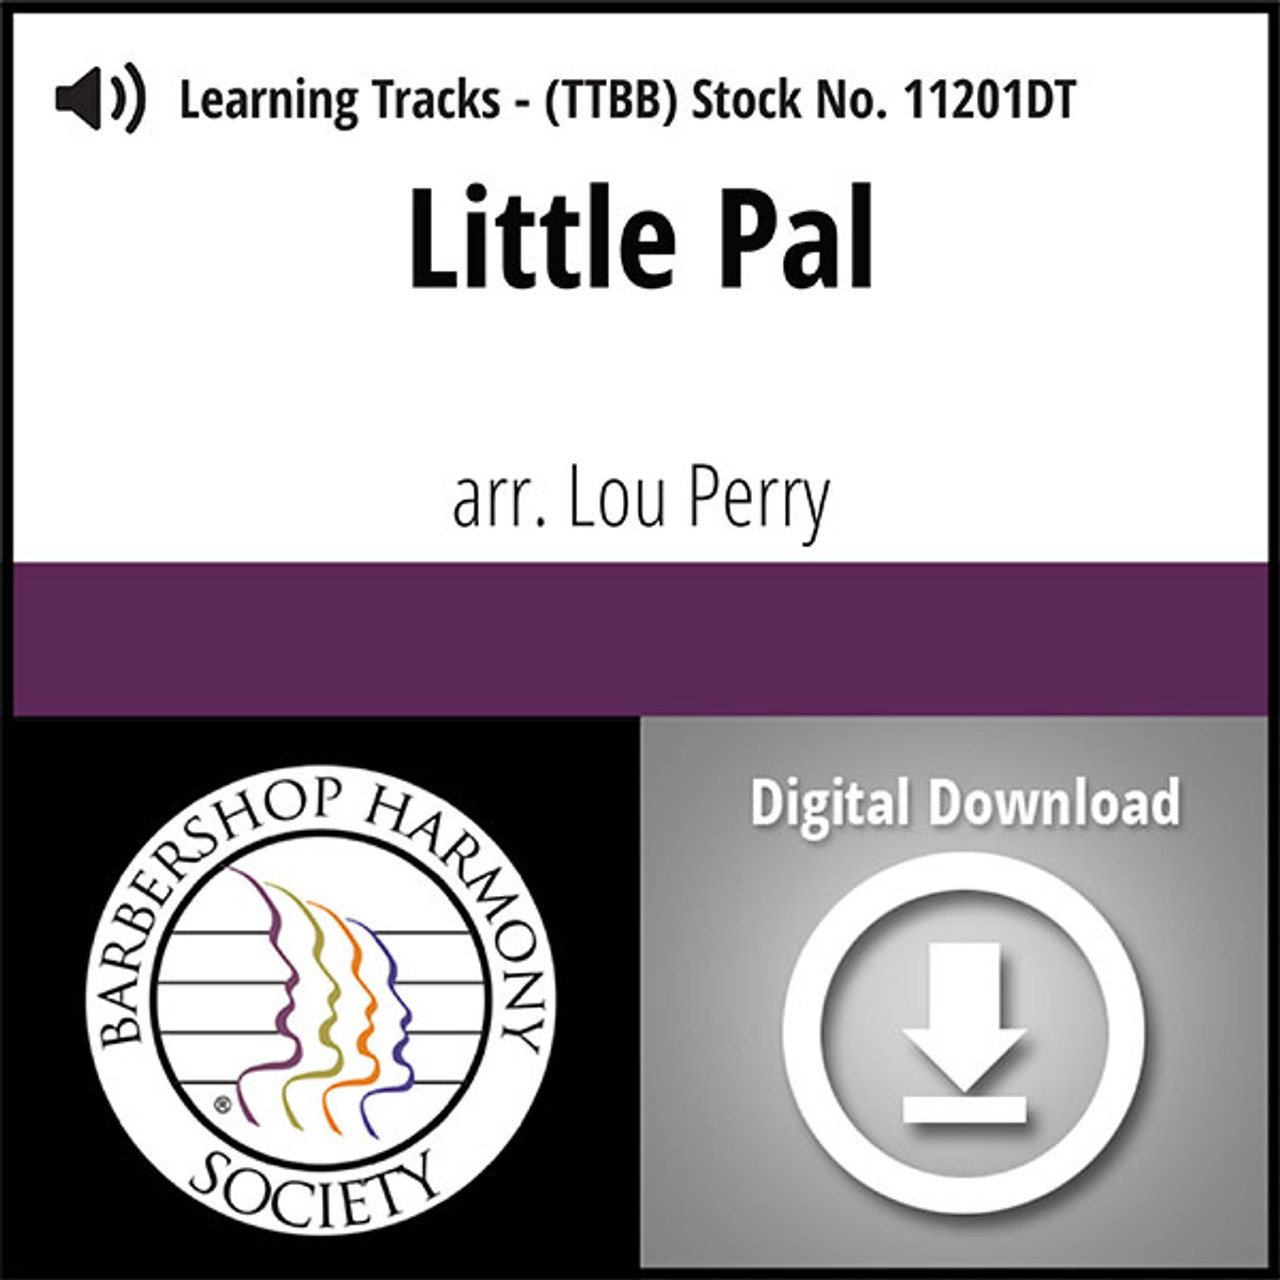 Little Pal (TTBB) (arr. Perry)(as sung by The Four Rascals) - Digital Learning Tracks for 7359